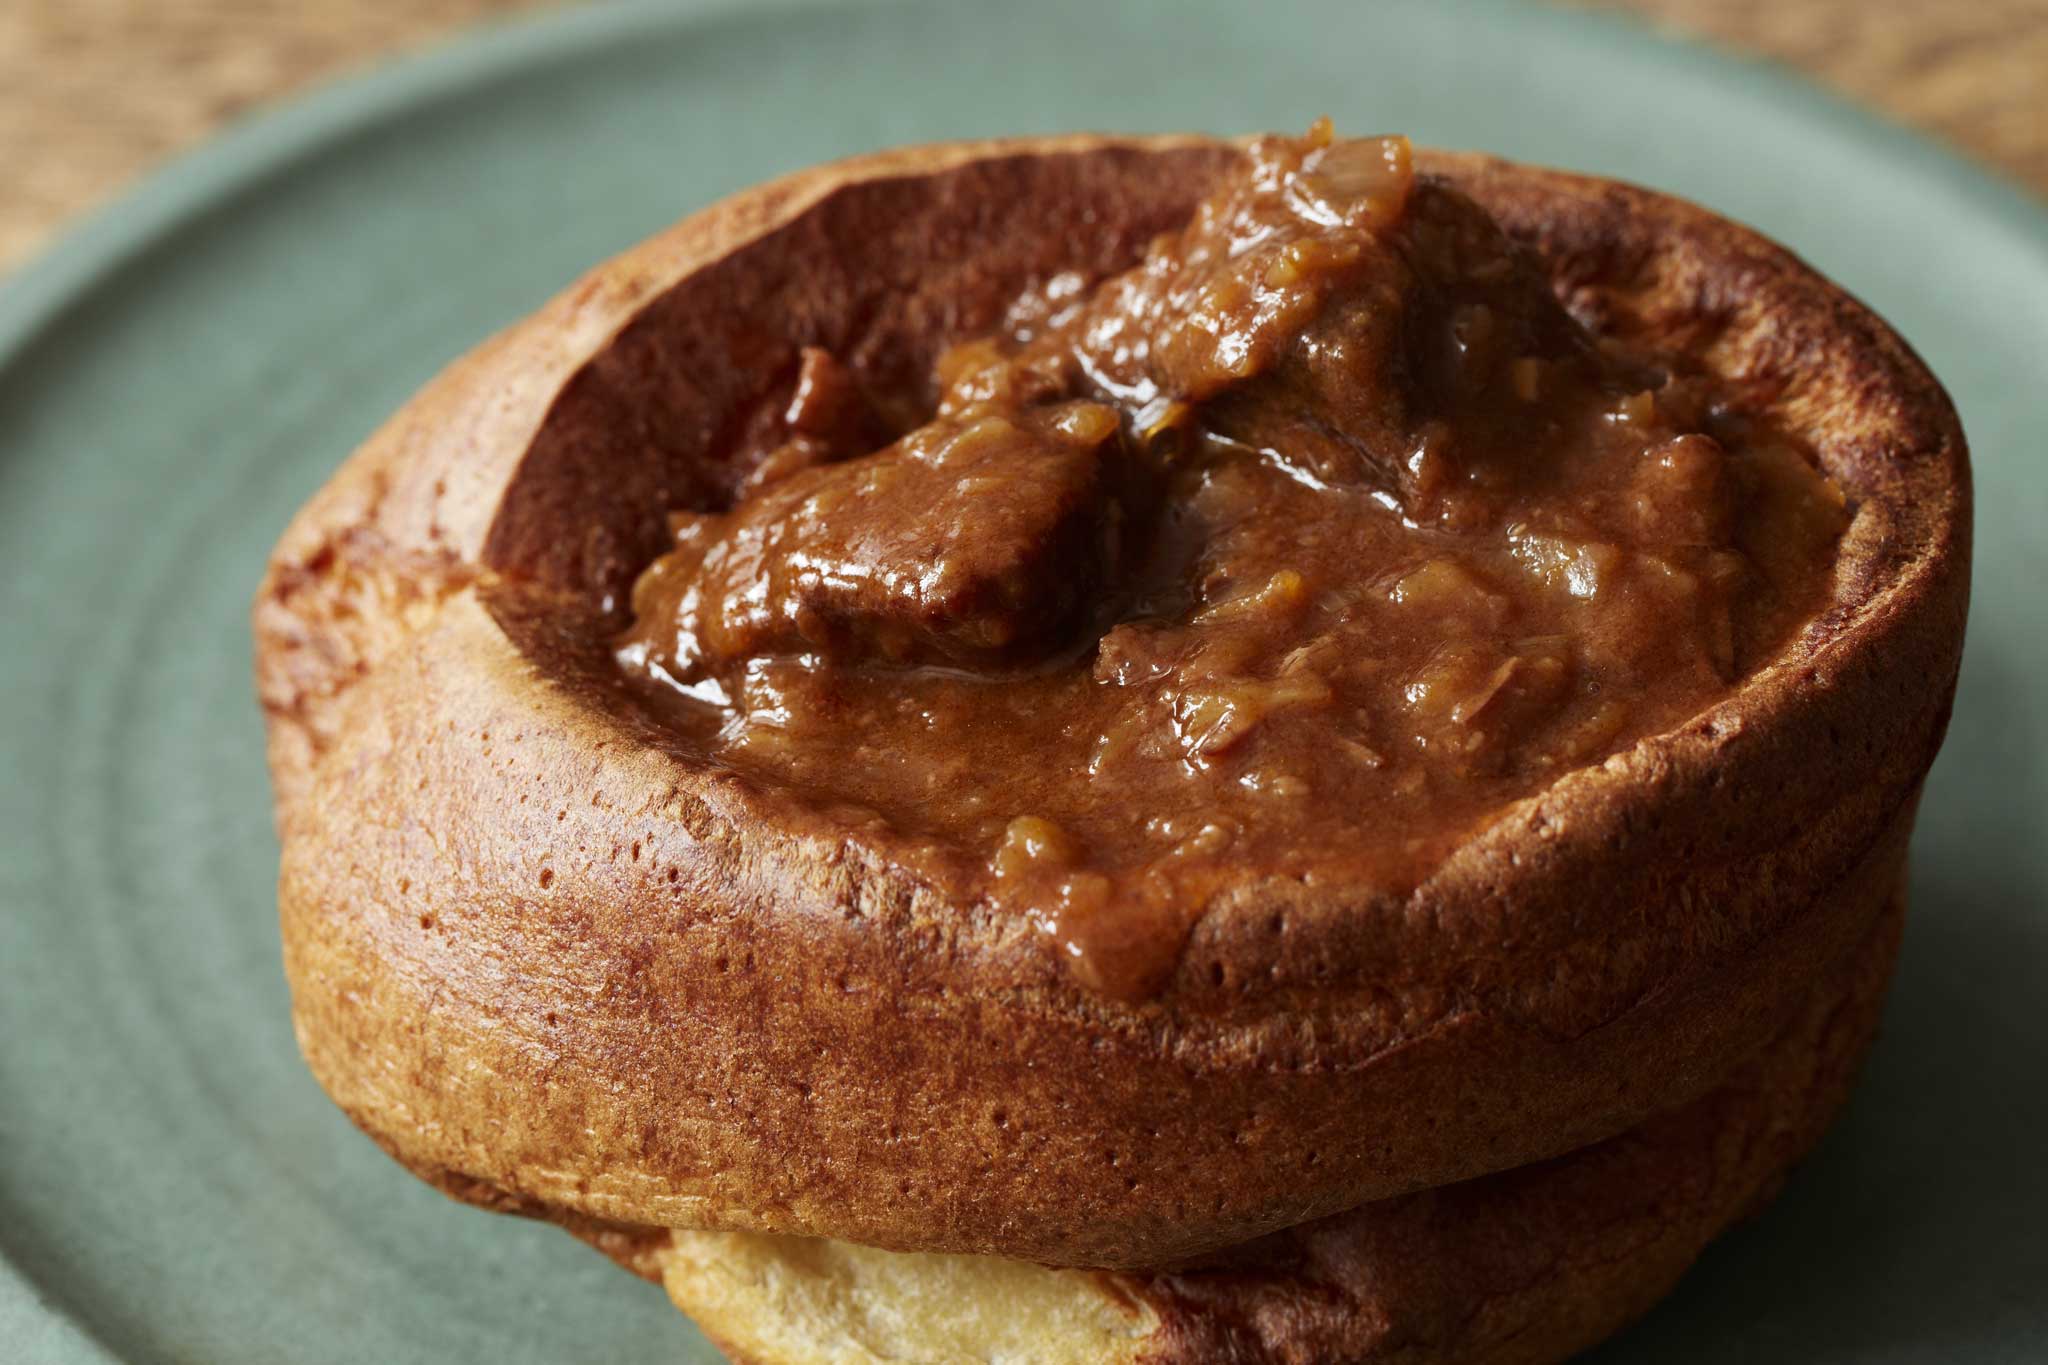 Yorkshire pudding with braised beef in Yorkshire ale